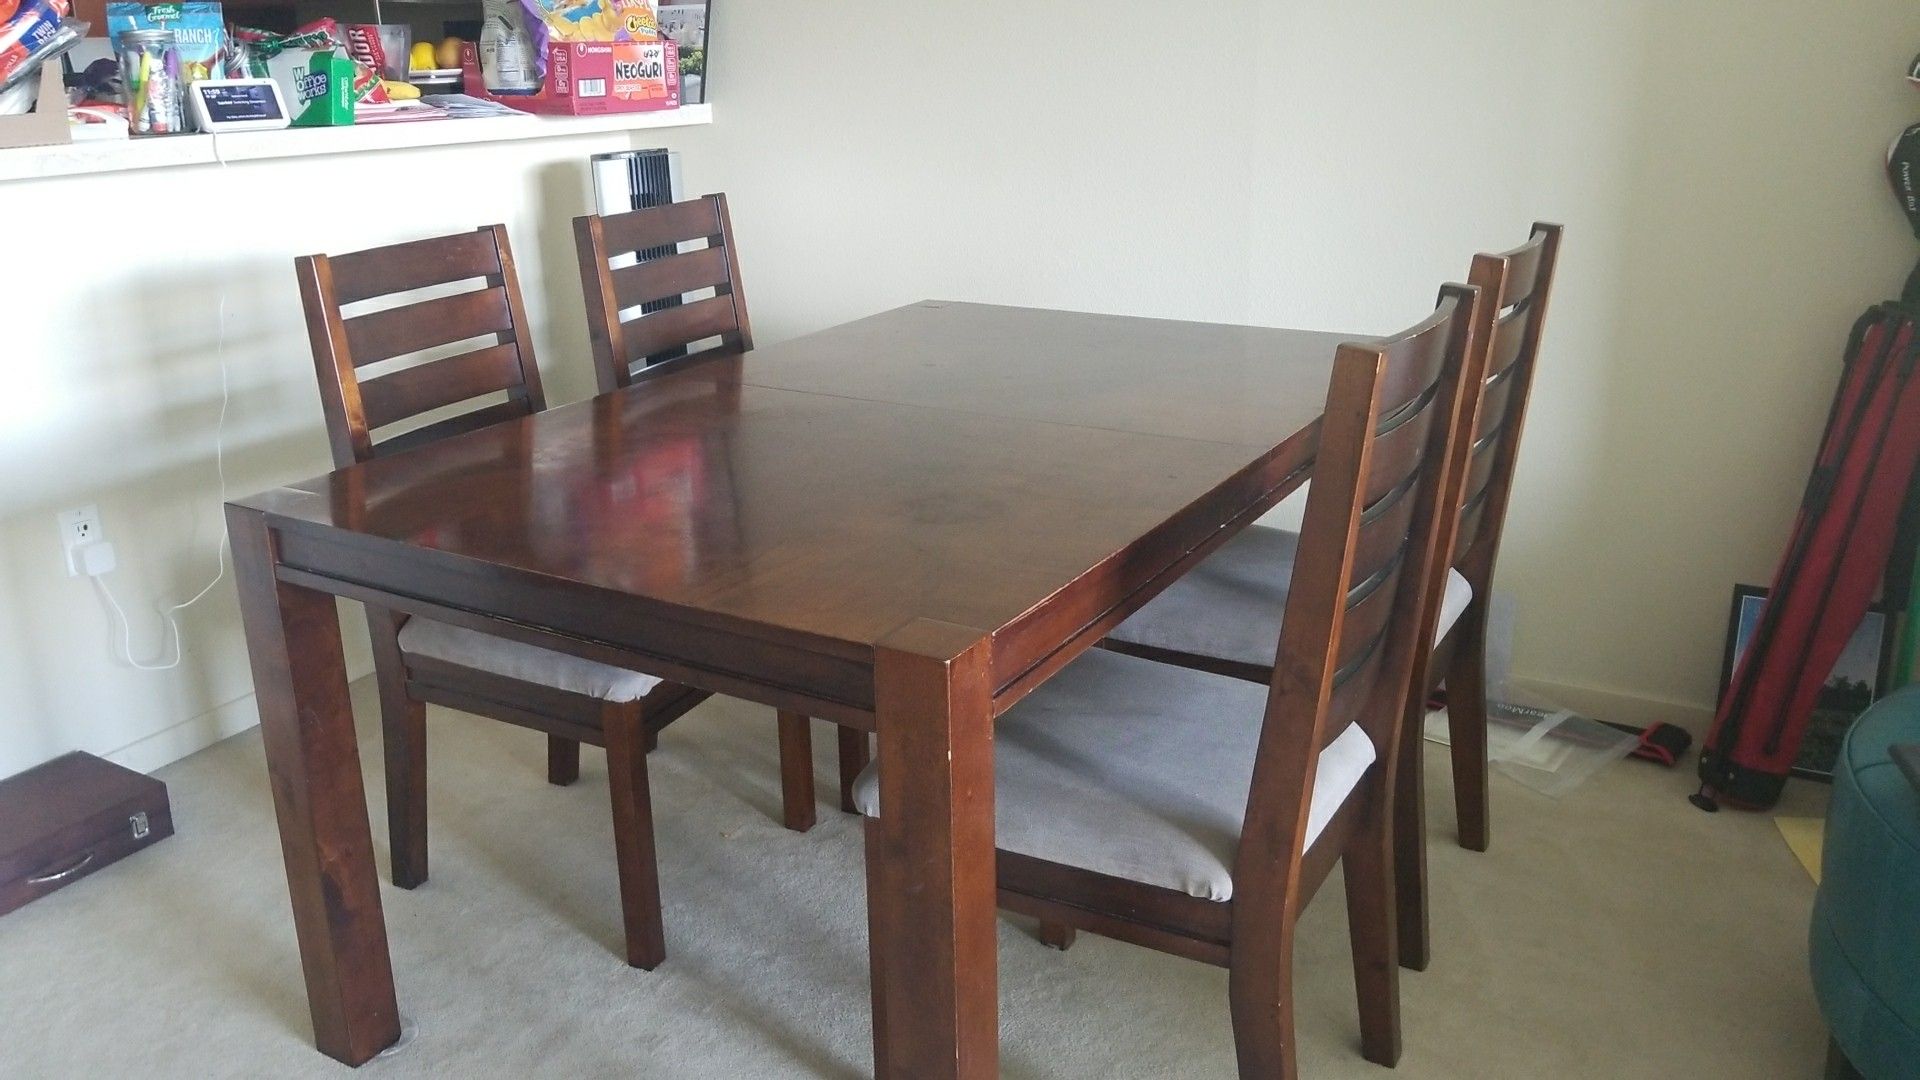 Dania dining table and 5 chairs. Extendable up to 8 seater